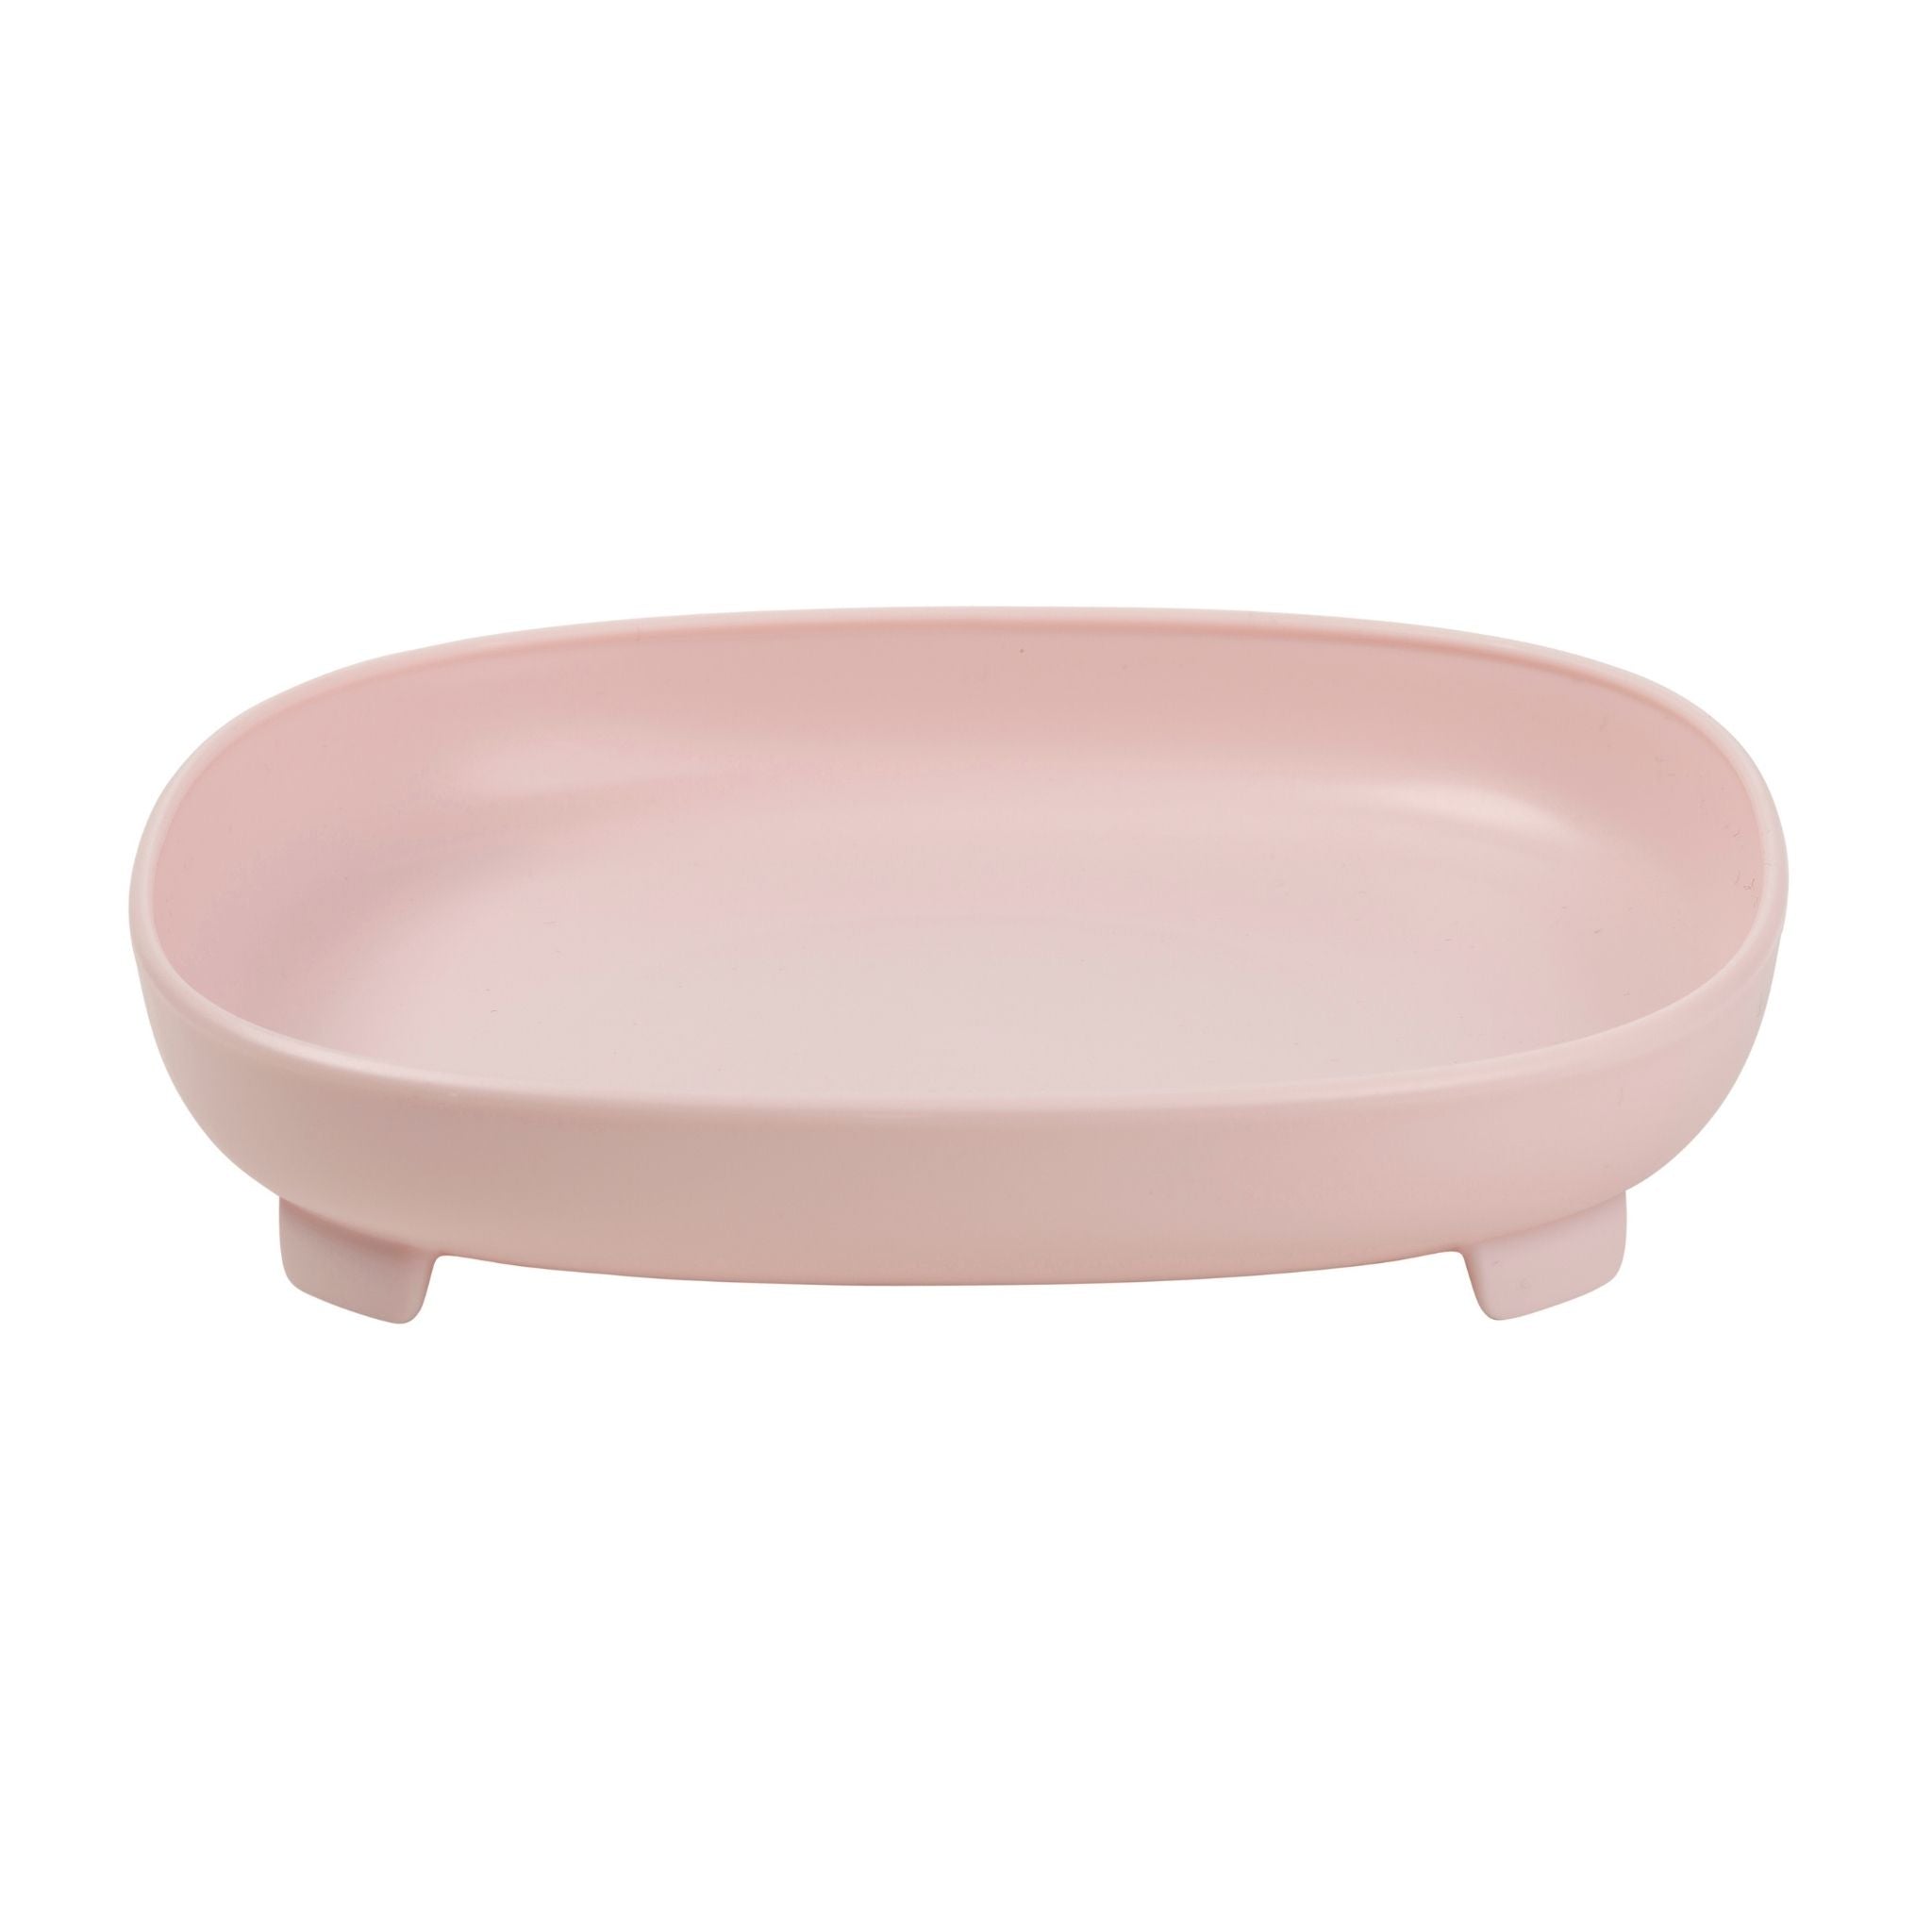 2 in 1 suction plate blush